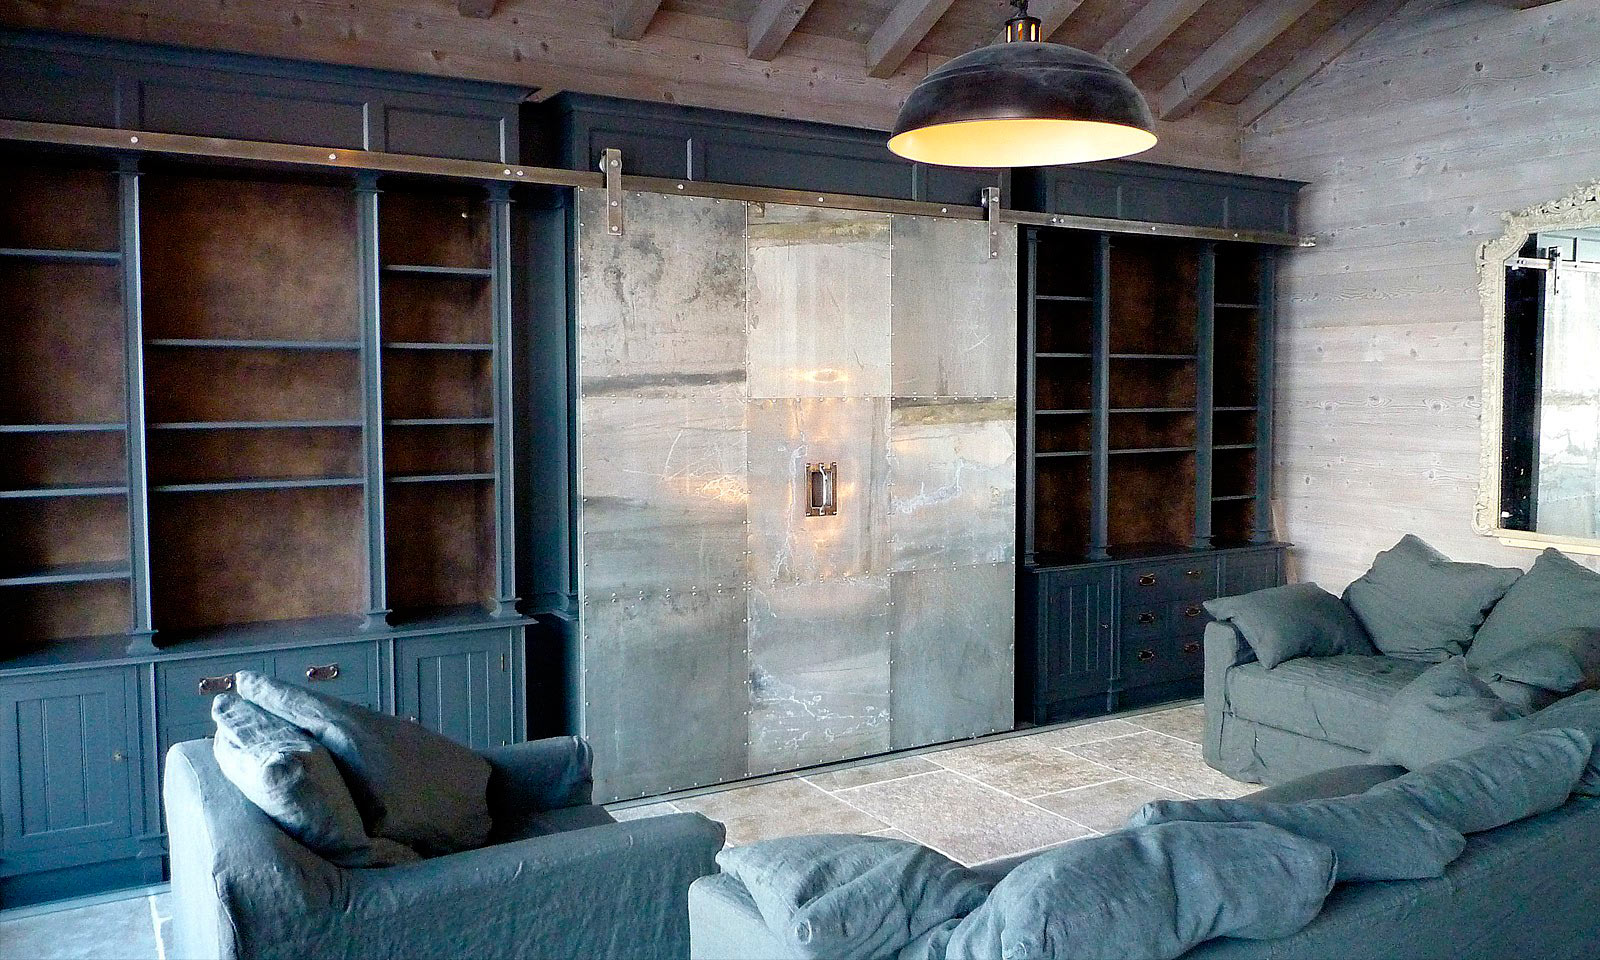 St Foy Media Unit. A bespoke and truly unique, full height media centre with an industrial twist. Manufactured for a ski chalet in St Foy, the unit features a riveted zinc sliding door and was hand-painted and installed by the skilled cabinet makers at Mounts Hill Woodcraft.